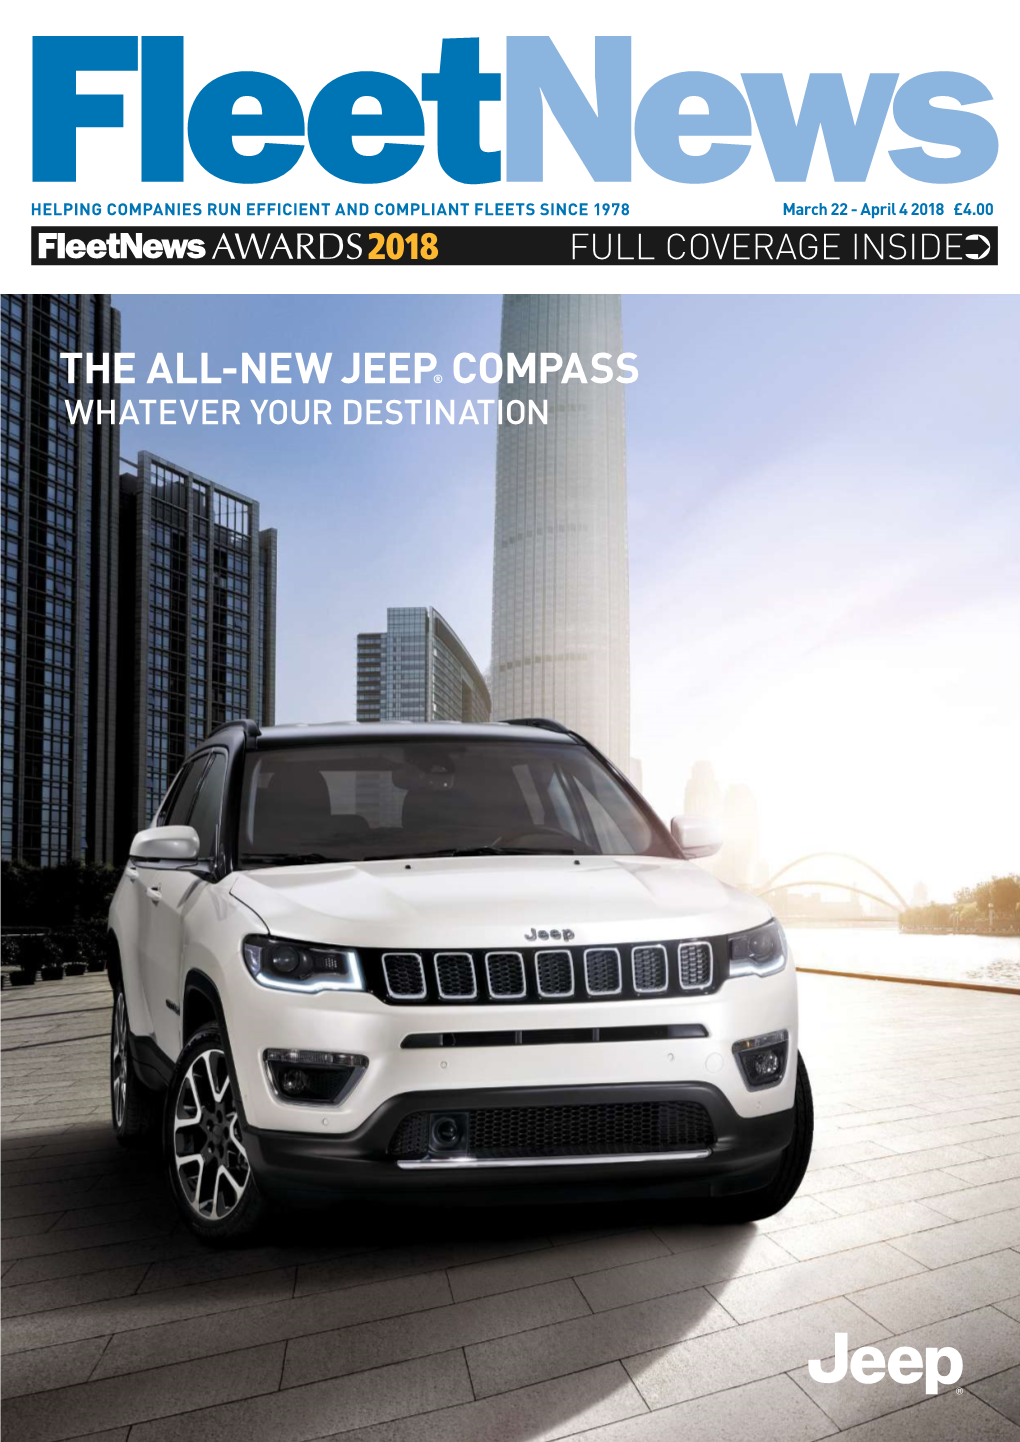 The All-New Jeep® Compass